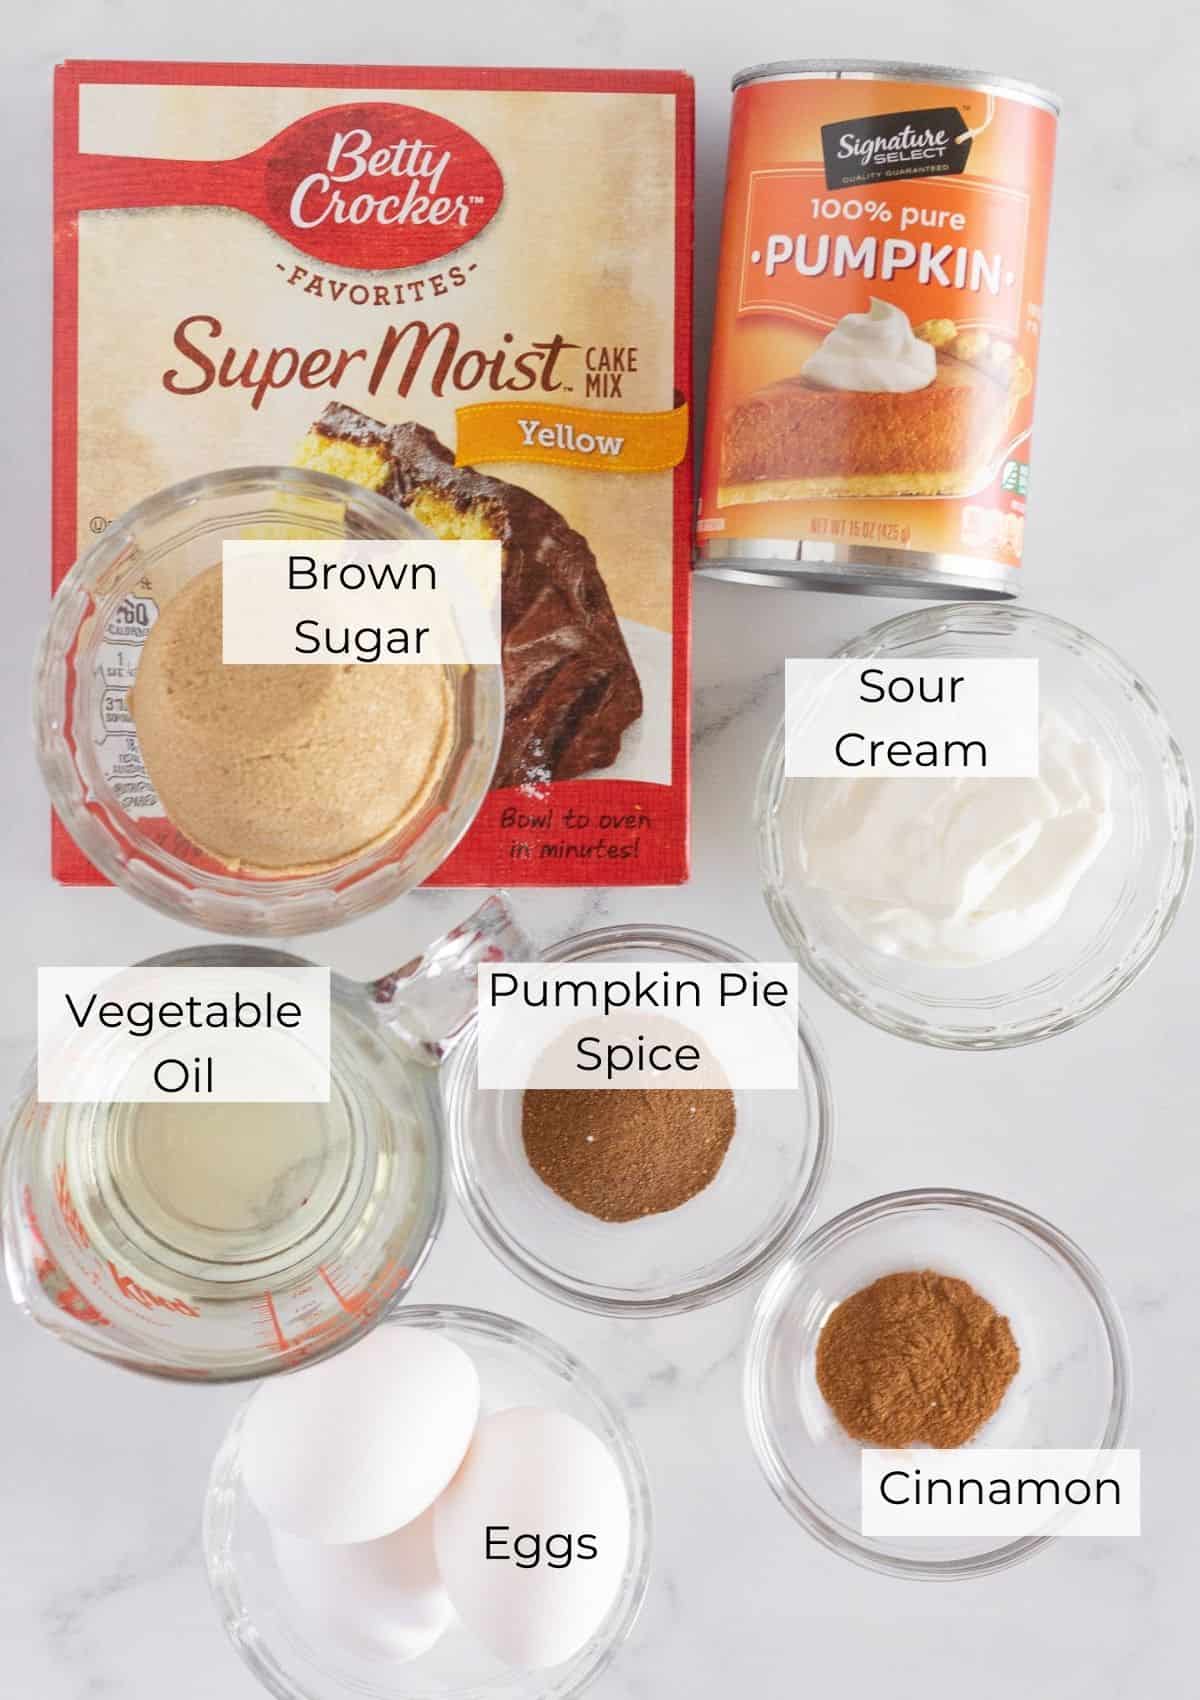 The ingredients needed to make pumpkin bread with a cake mix.